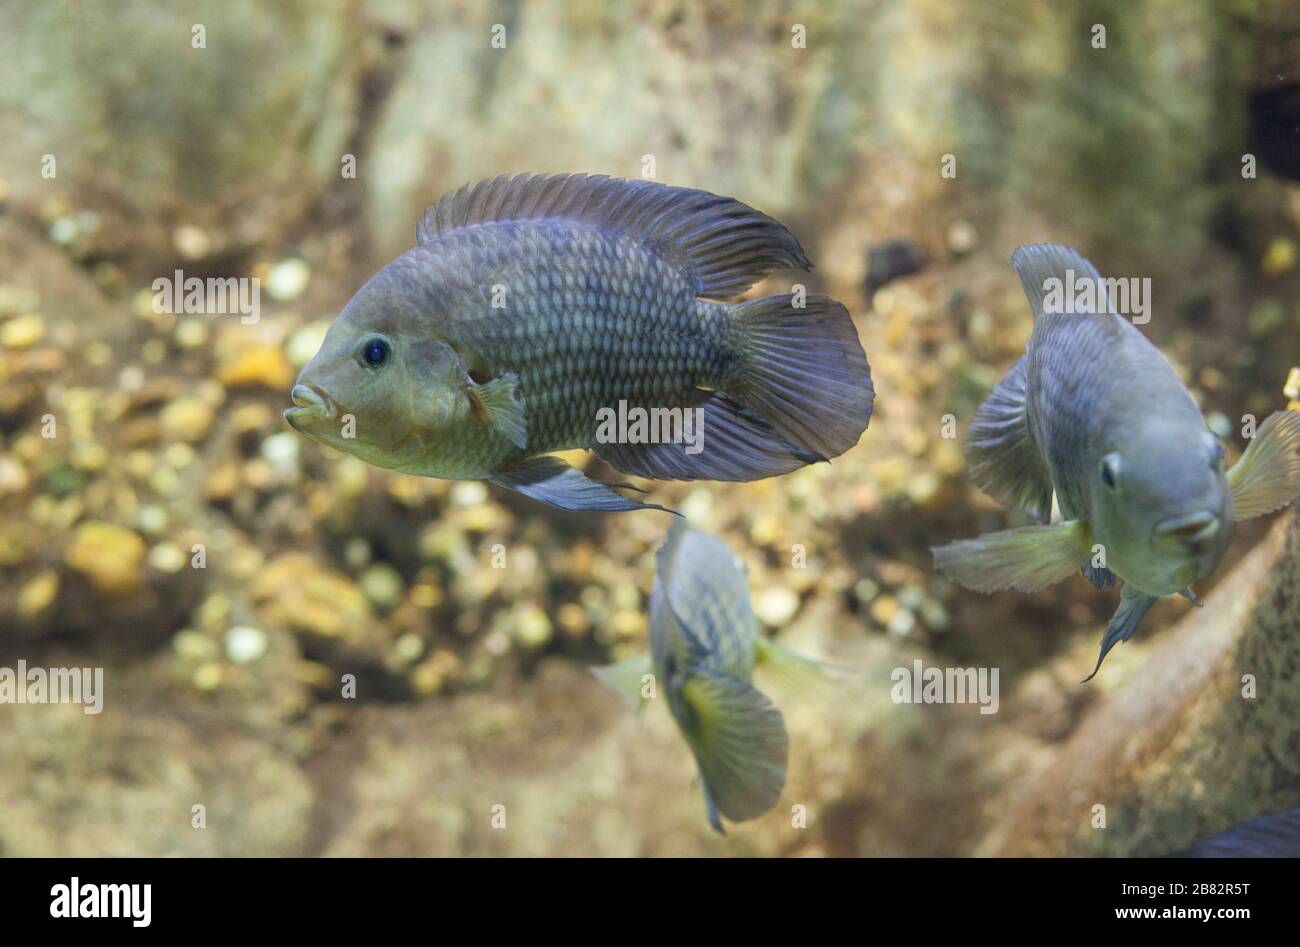 Australoheros facetus or  chameleon cichlid or chanchito, a species of cichlid fish Stock Photo